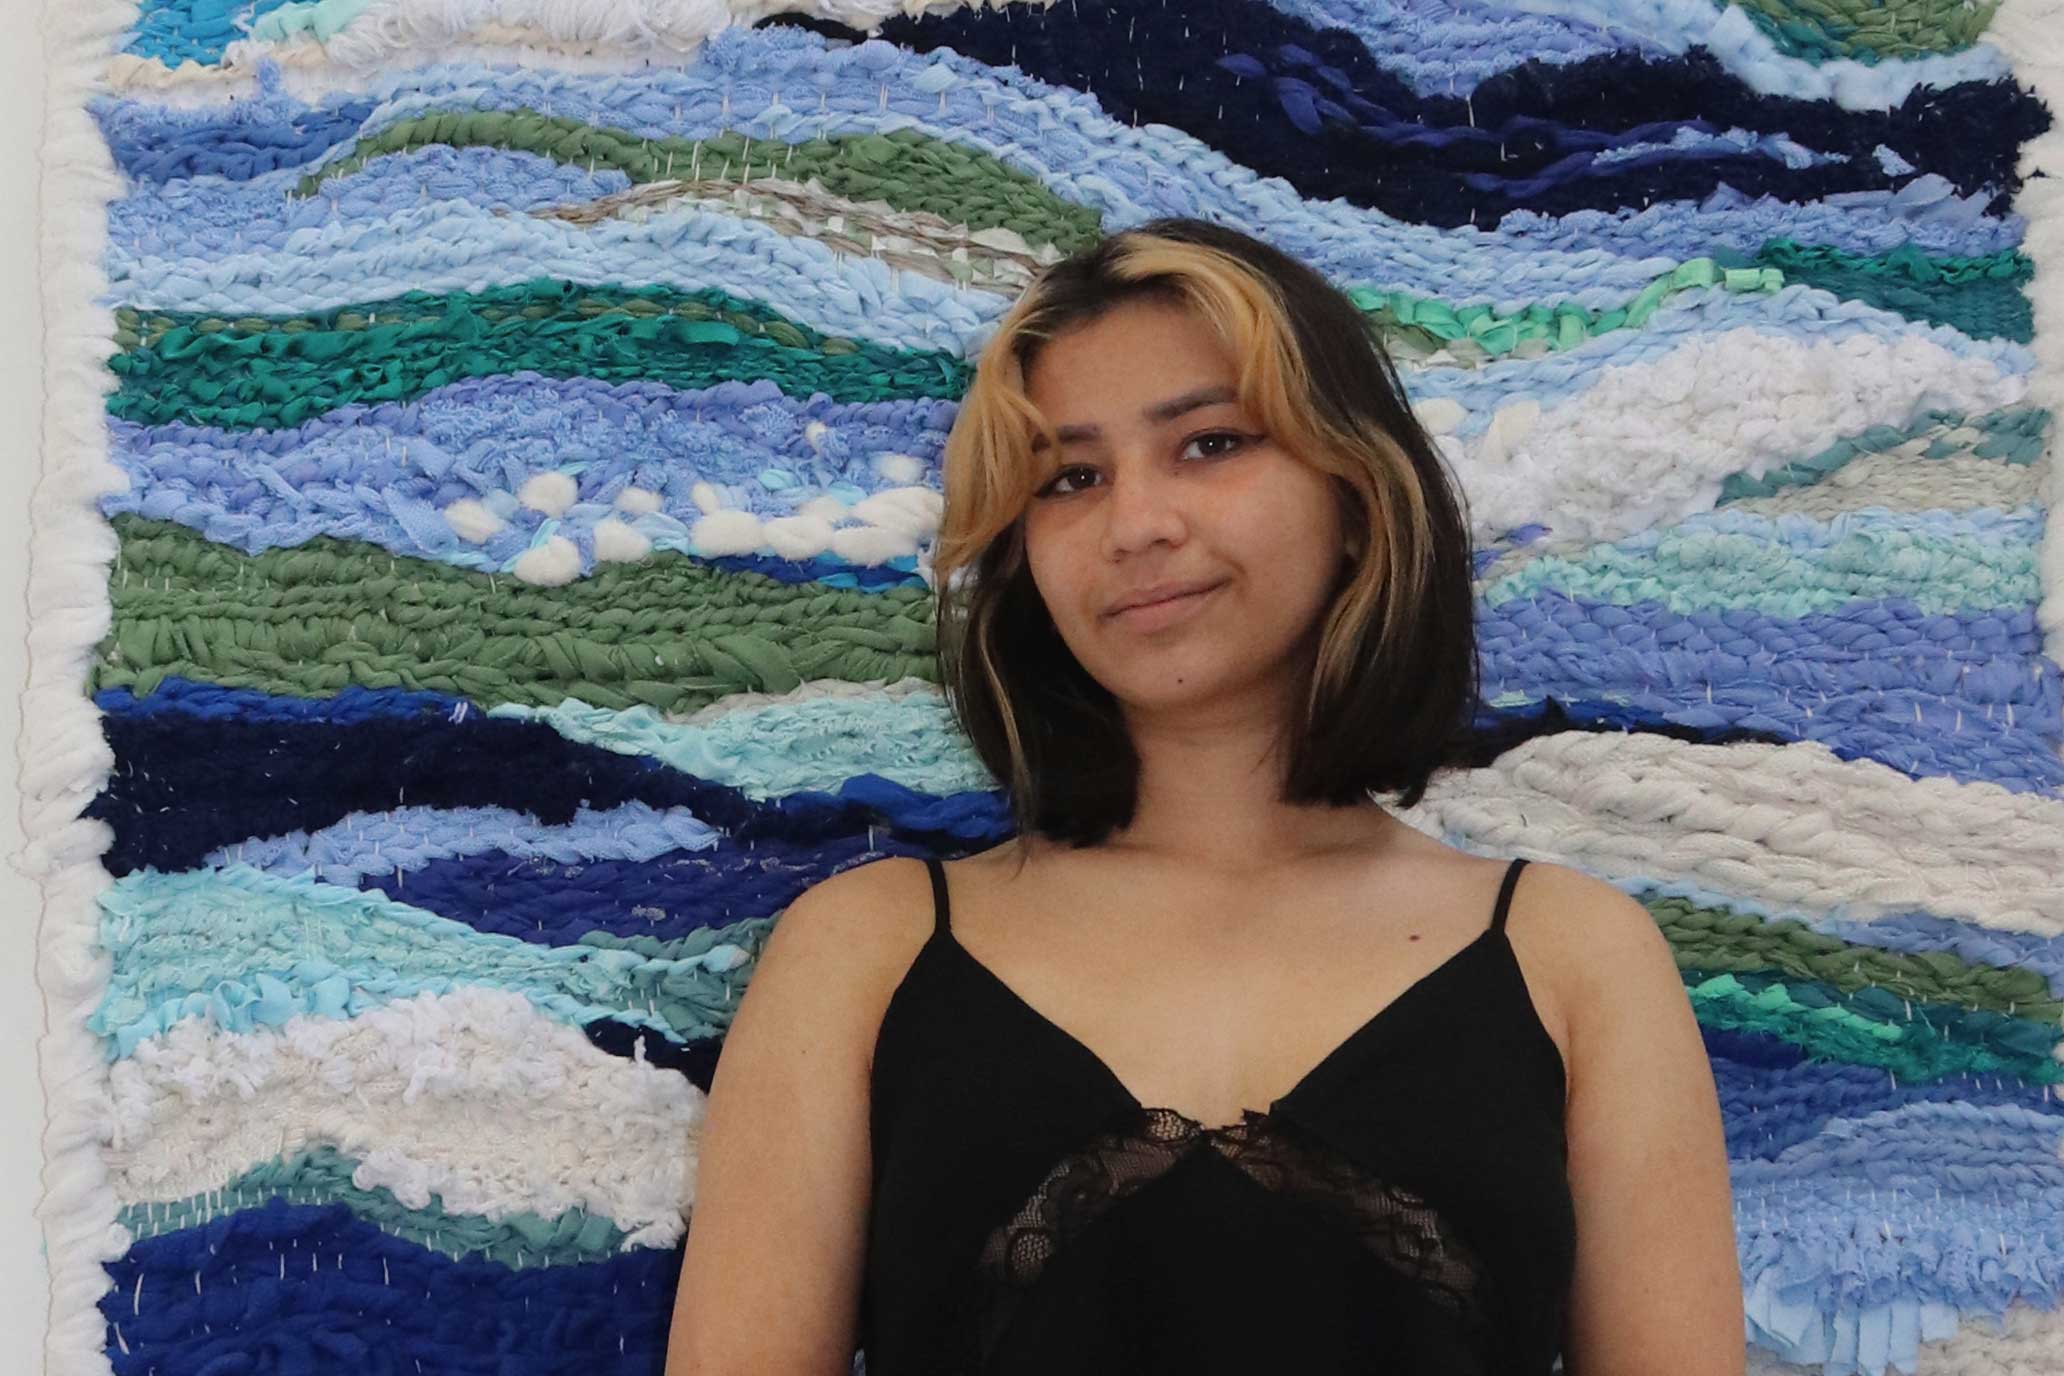 A young, female student is pictured in front of a wall hanging of woven textiles in different shades of blue with some green and white. She has shoulder length dark brown bob with blond streaks at the front and is wearing a black vest top. She is smiling with a closed mouth.